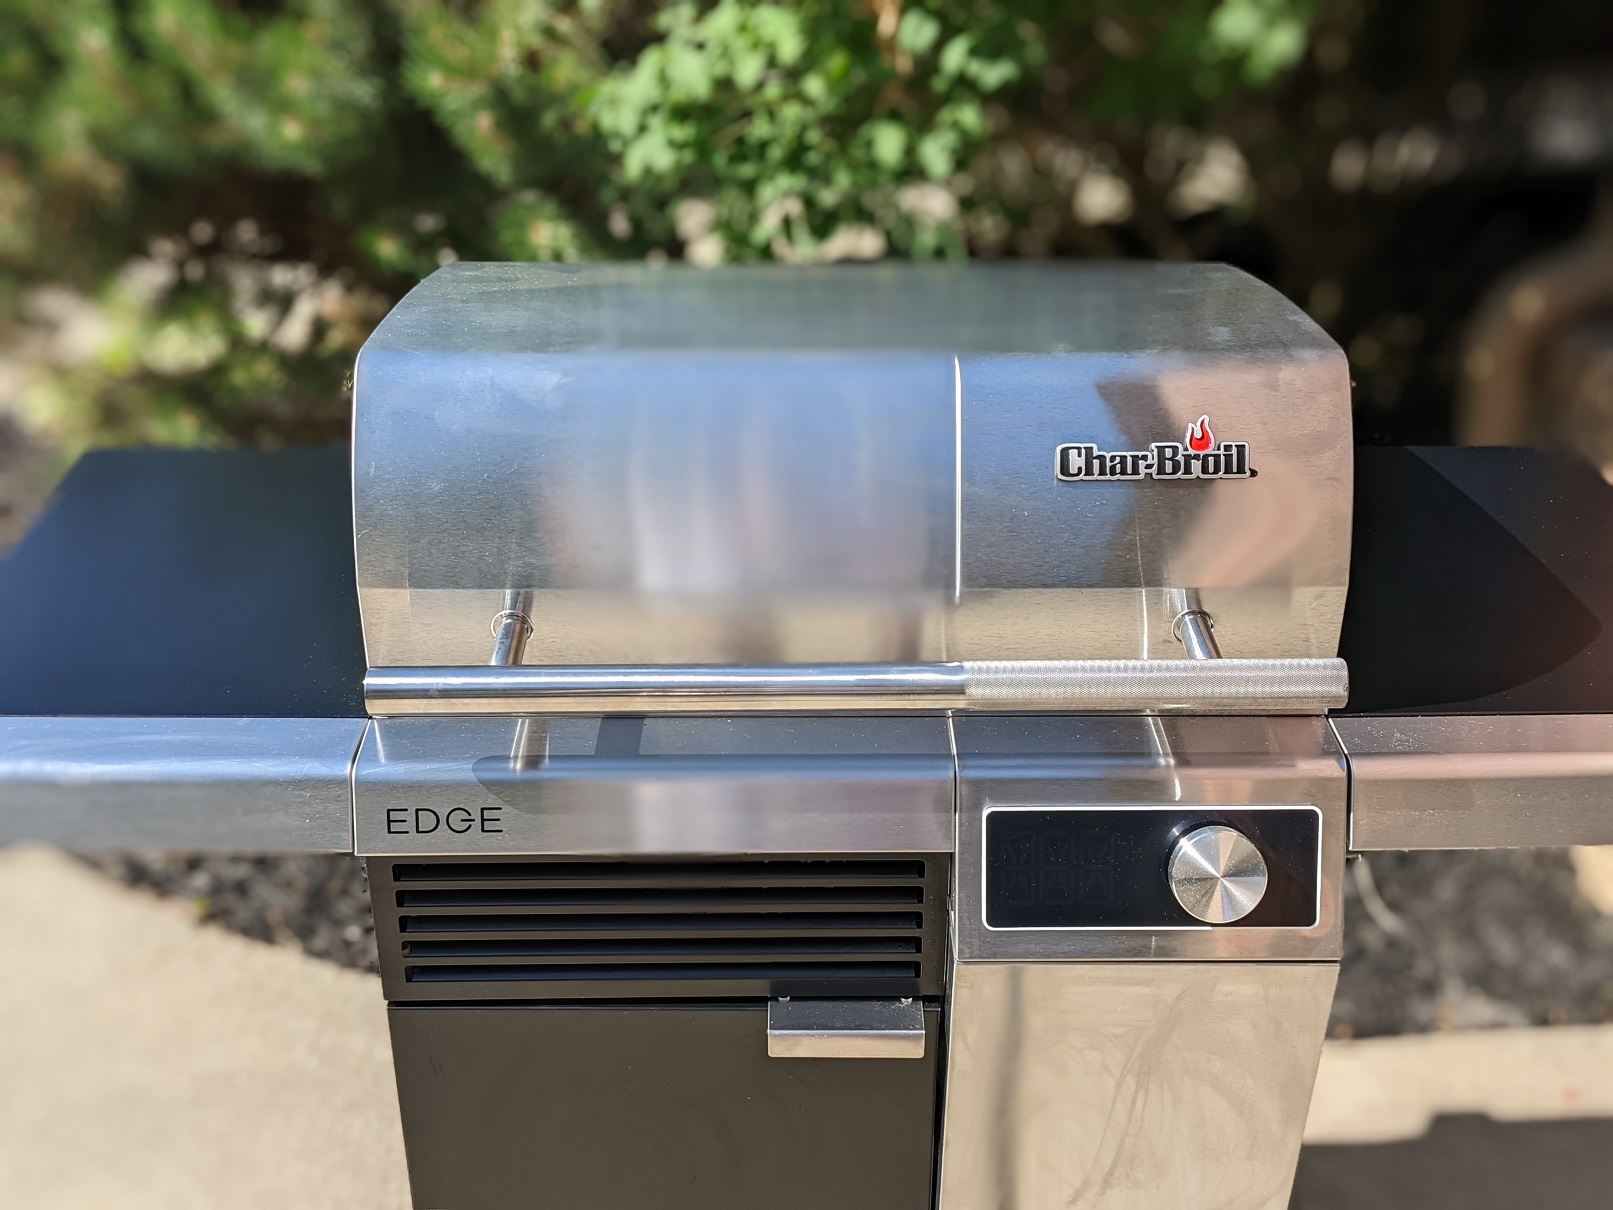 https://www.cookoutnews.com/wp-content/uploads/2022/07/Char-Broil-Edge-Electric-Grill.jpg